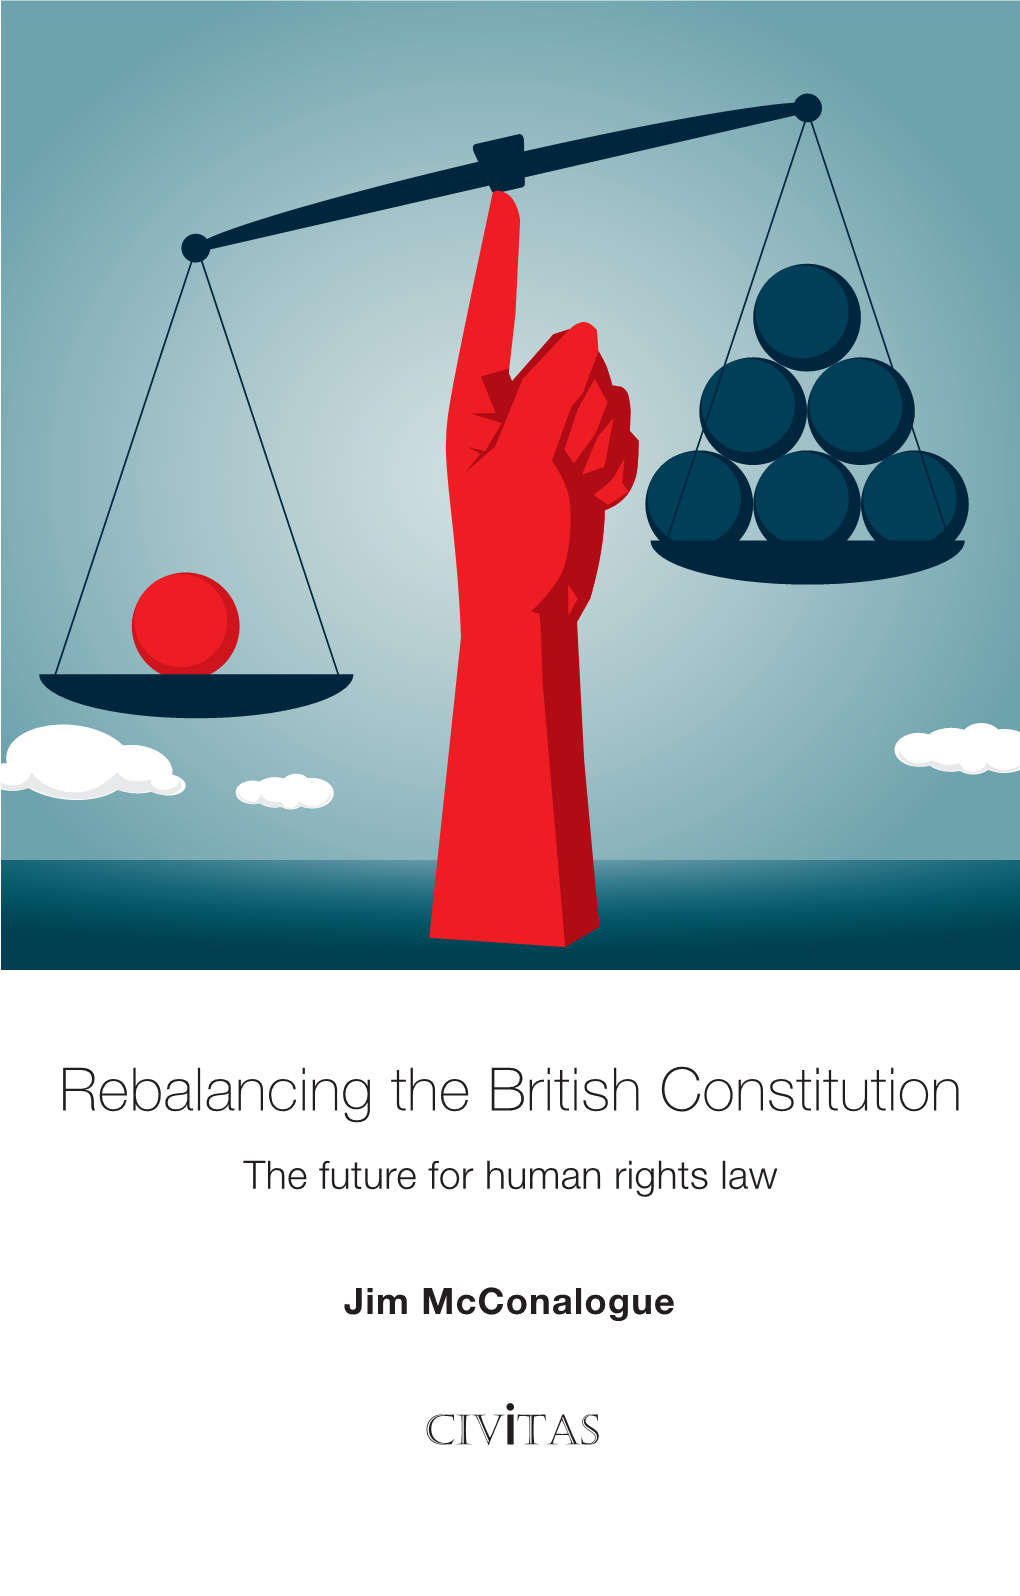 Rebalancing the British Constitution the Future for Human Rights Law